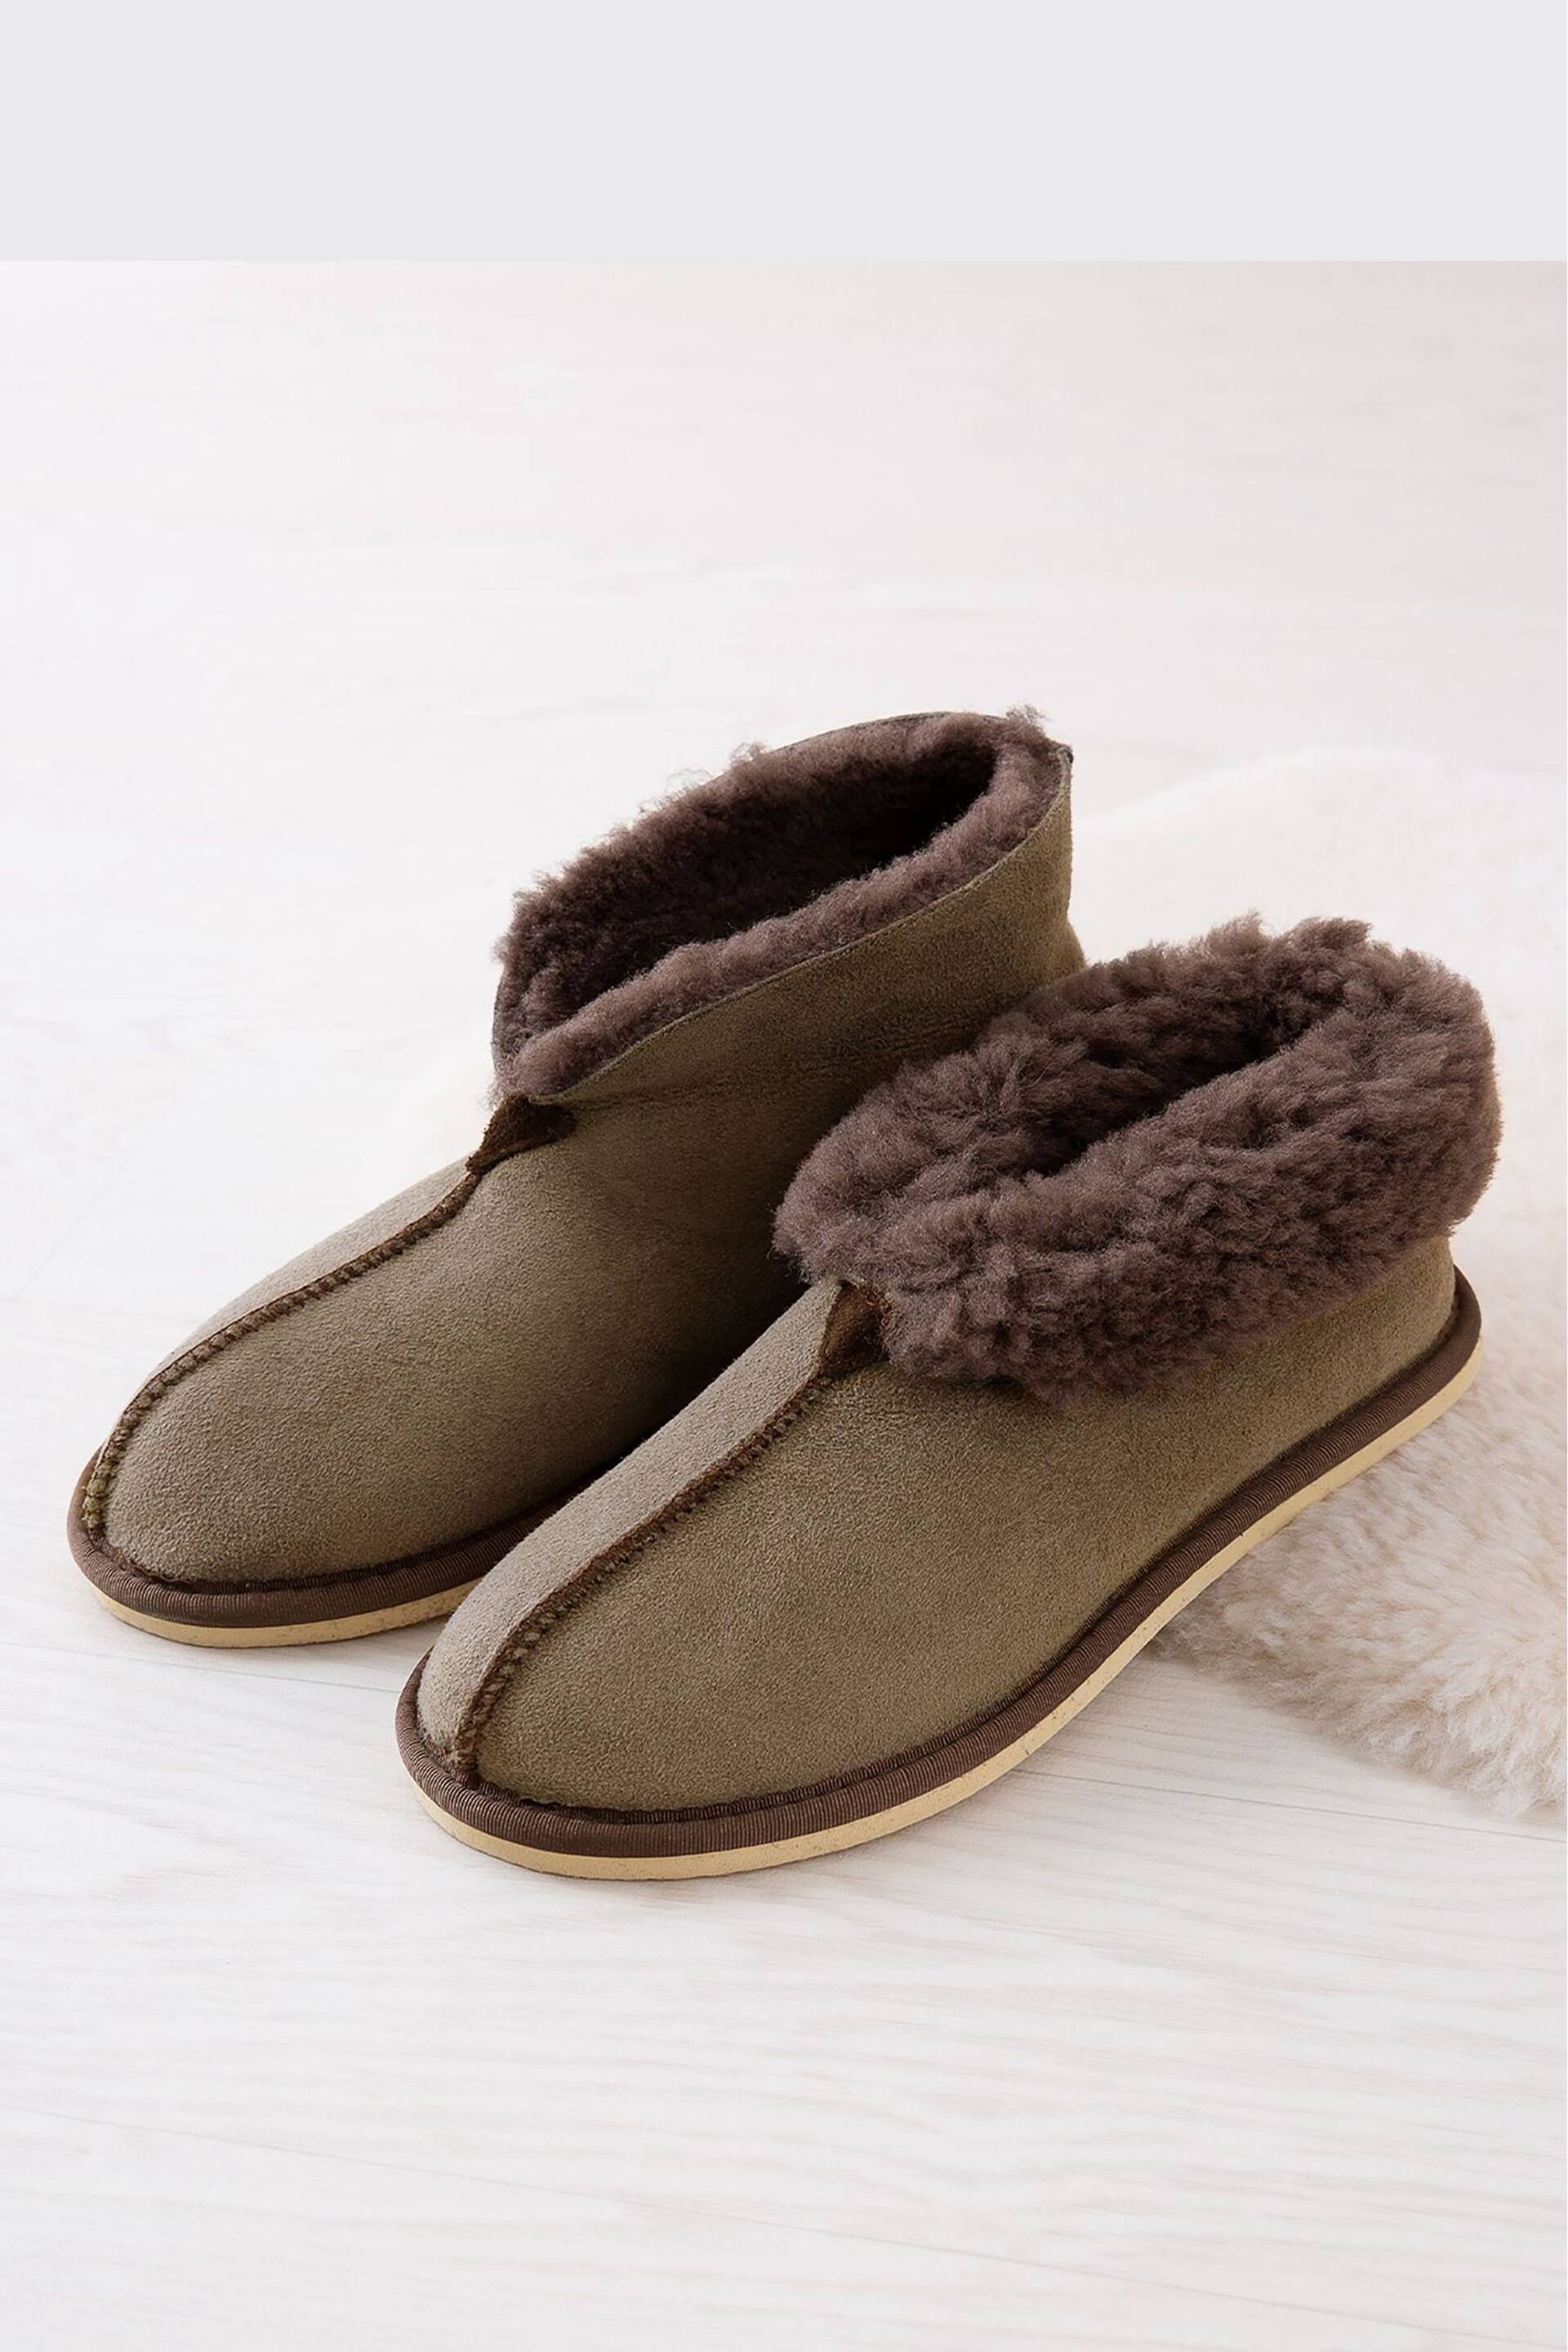 Celtic & Co. Ladies Pink Sheepskin Bootee Slippers - Image 5 of 5